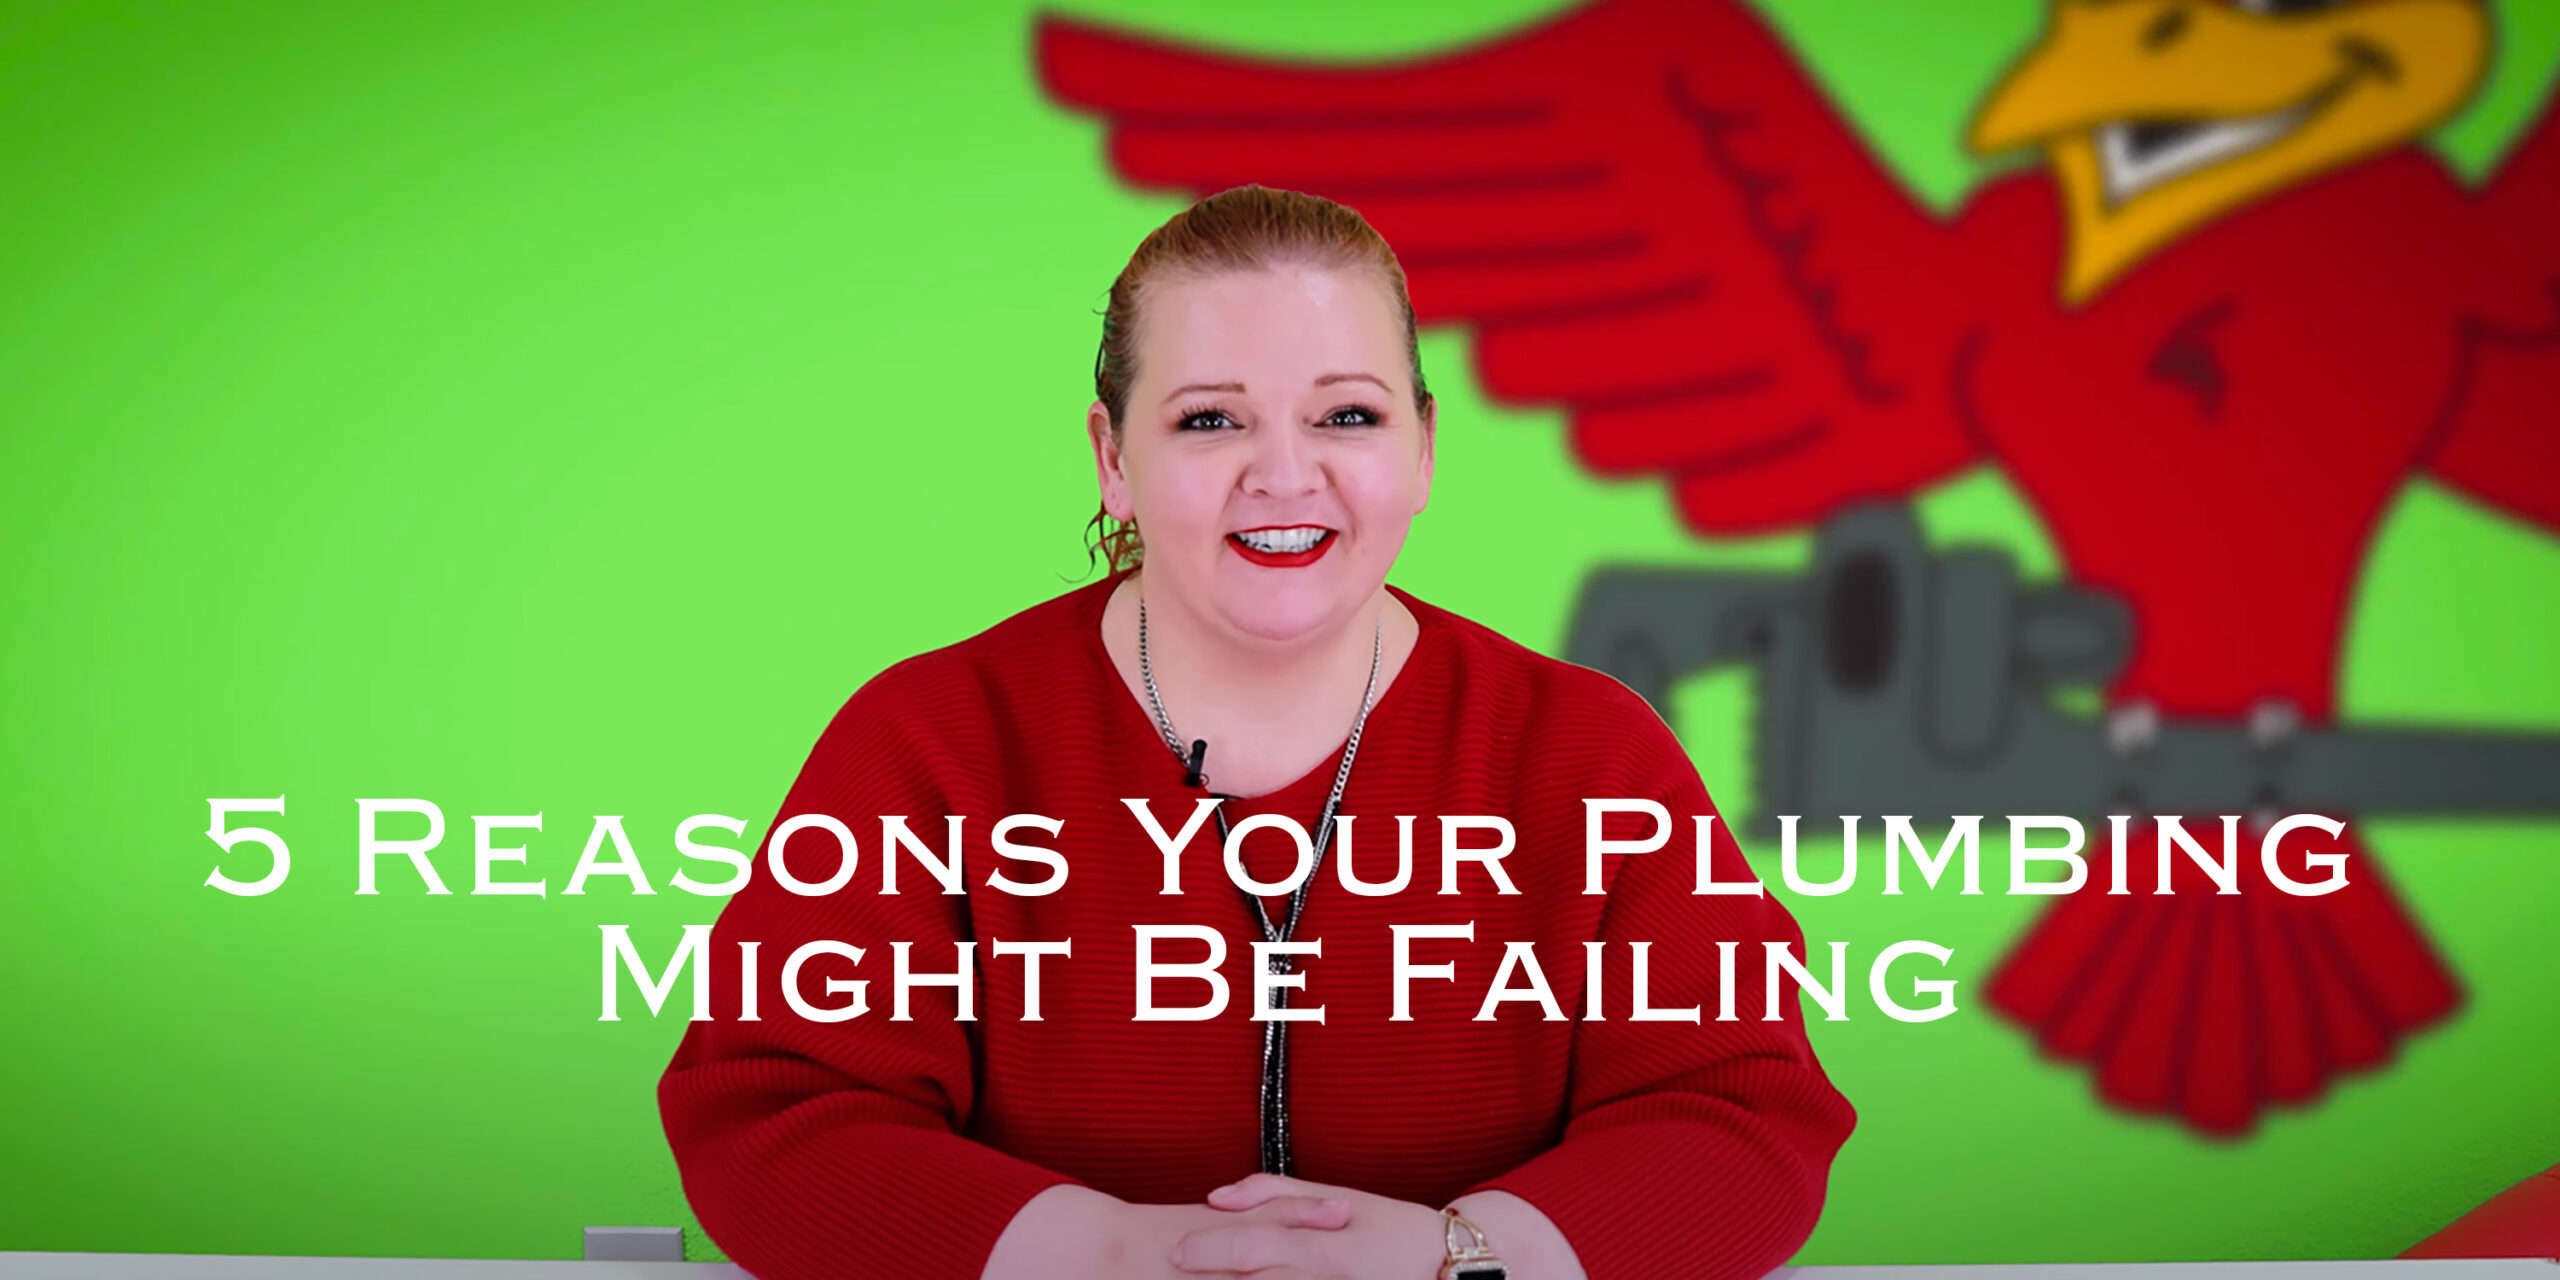 Featured image for Robins Plumbing's blog titled "5-reasons-your-plumbing-might-be-failing"